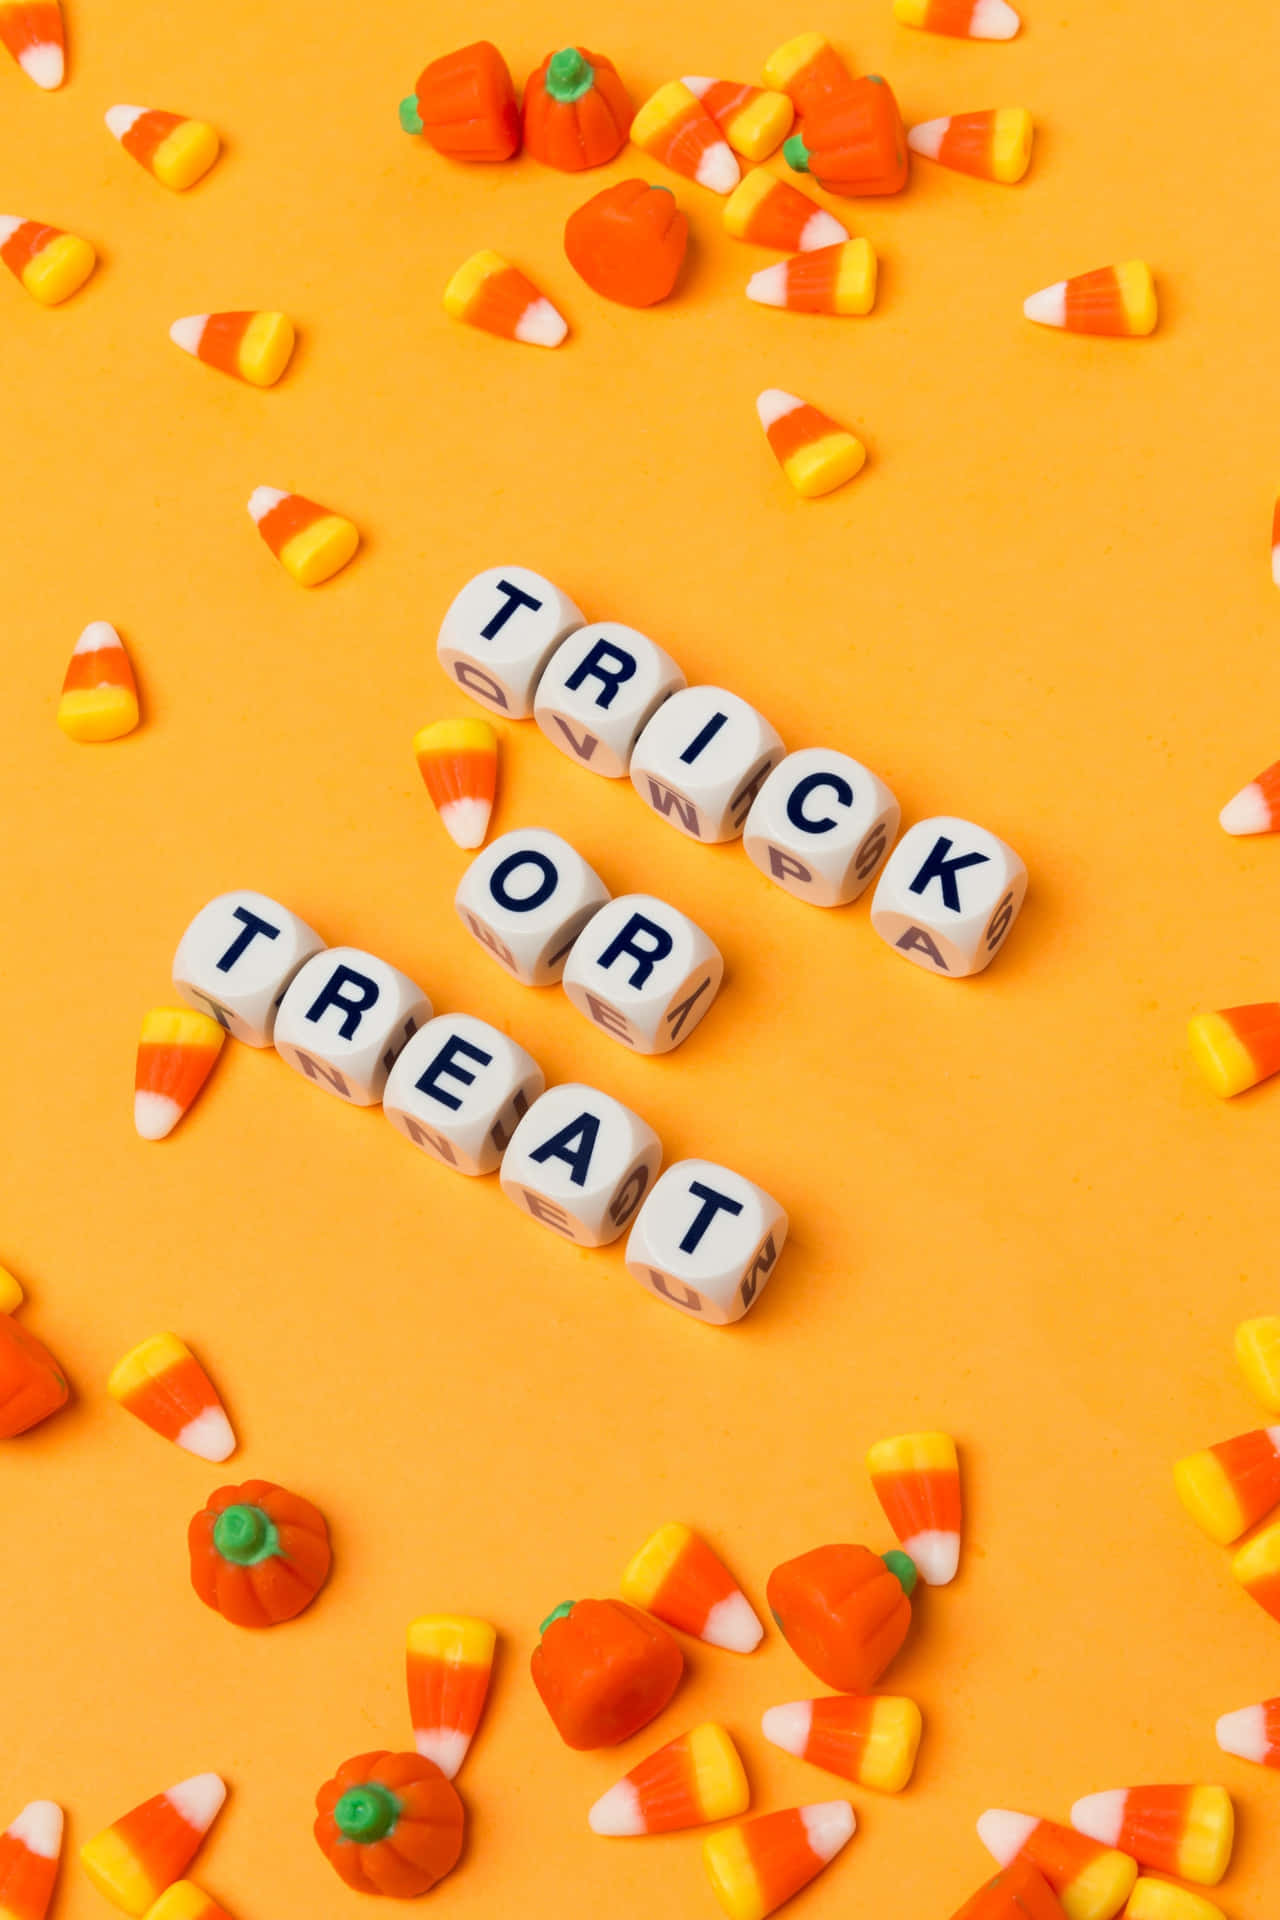 A Halloween Candy Corn And Trick Or Treat Letters On An Orange Background